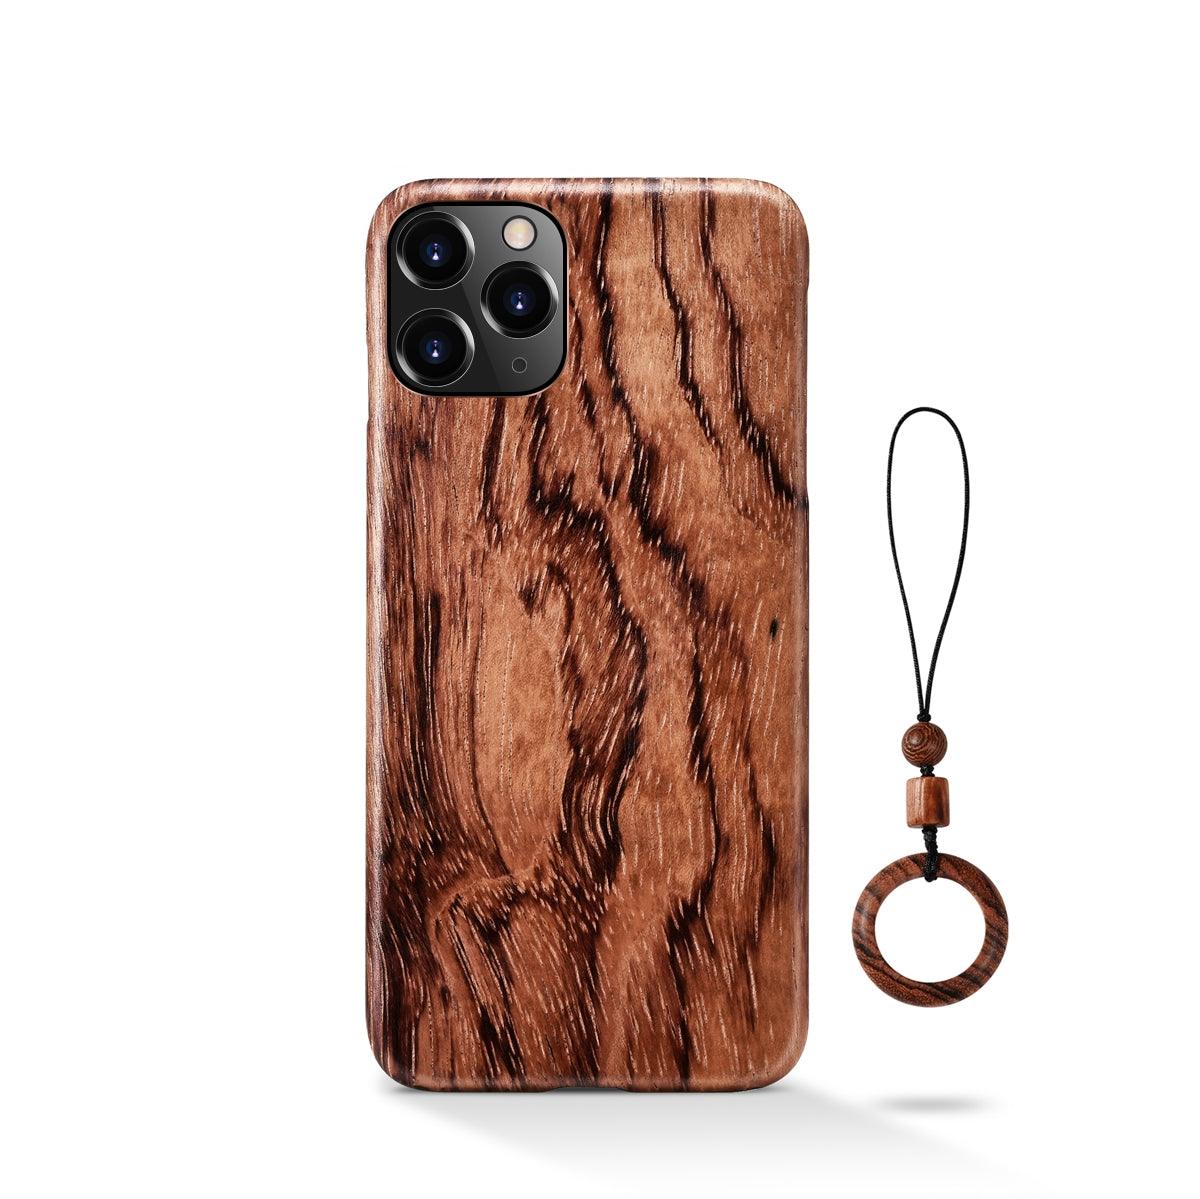 This Stylish Phone Case is Ultra-Thin And Crafted From Frosted Wood - BUNNY BAZAR